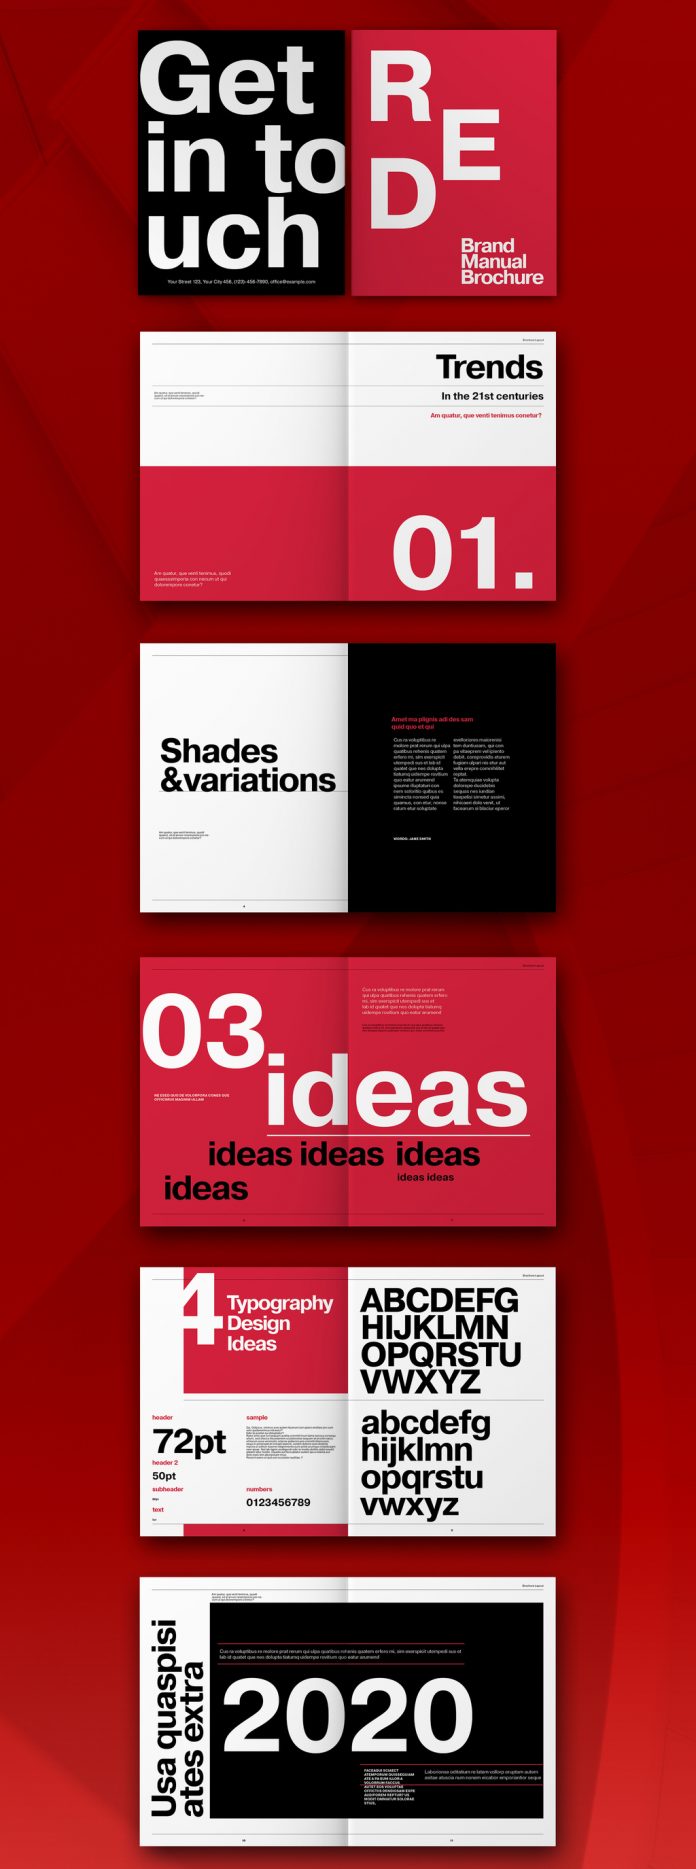 Brand Manual InDesign Template with Bold Typography